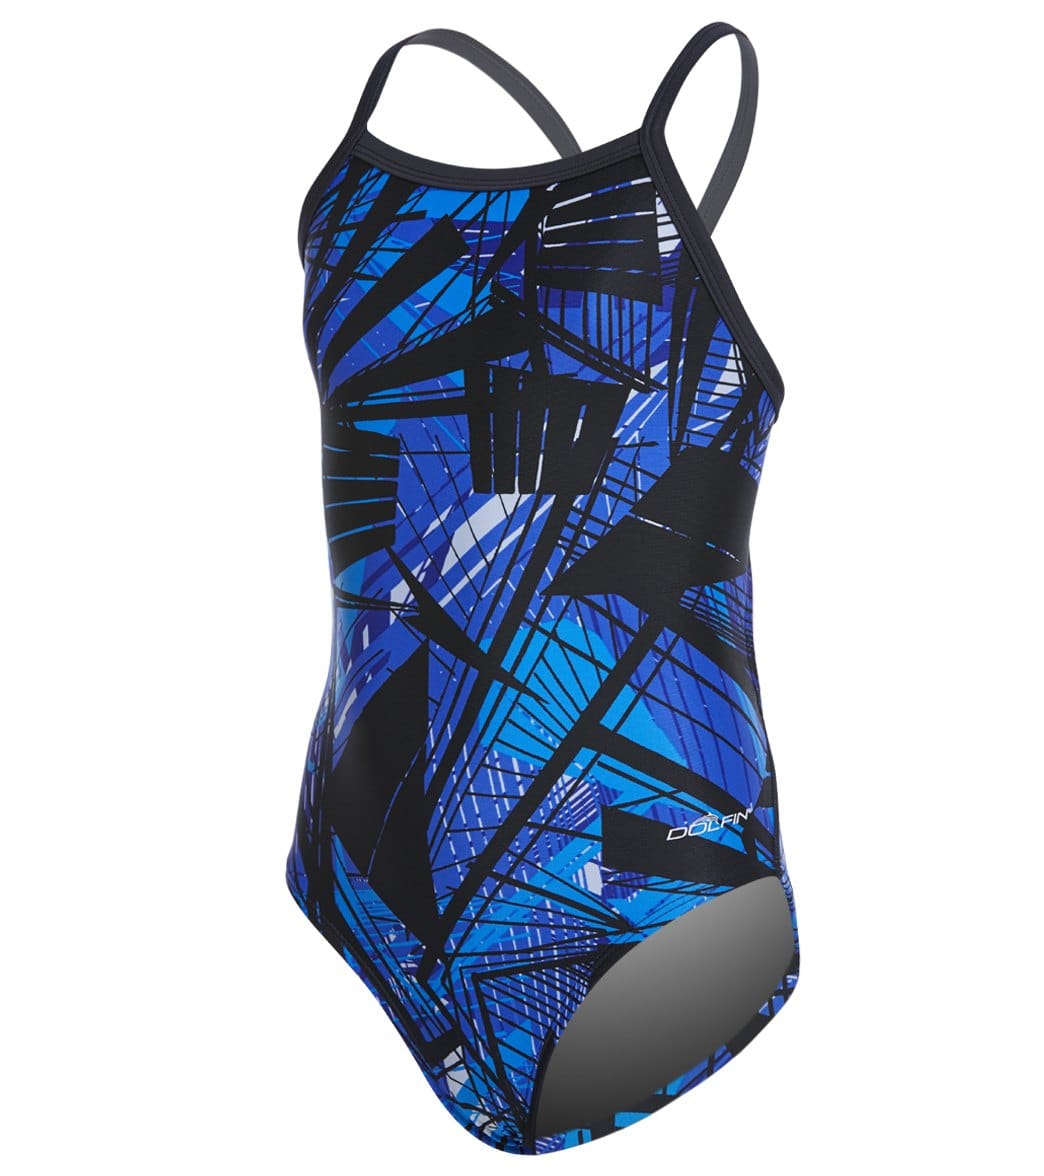 Dolfin Xtrasleek Eco Girls Torrent V 2 Back One Piece Swimsuit At Swimoutlet Com Free Shipping